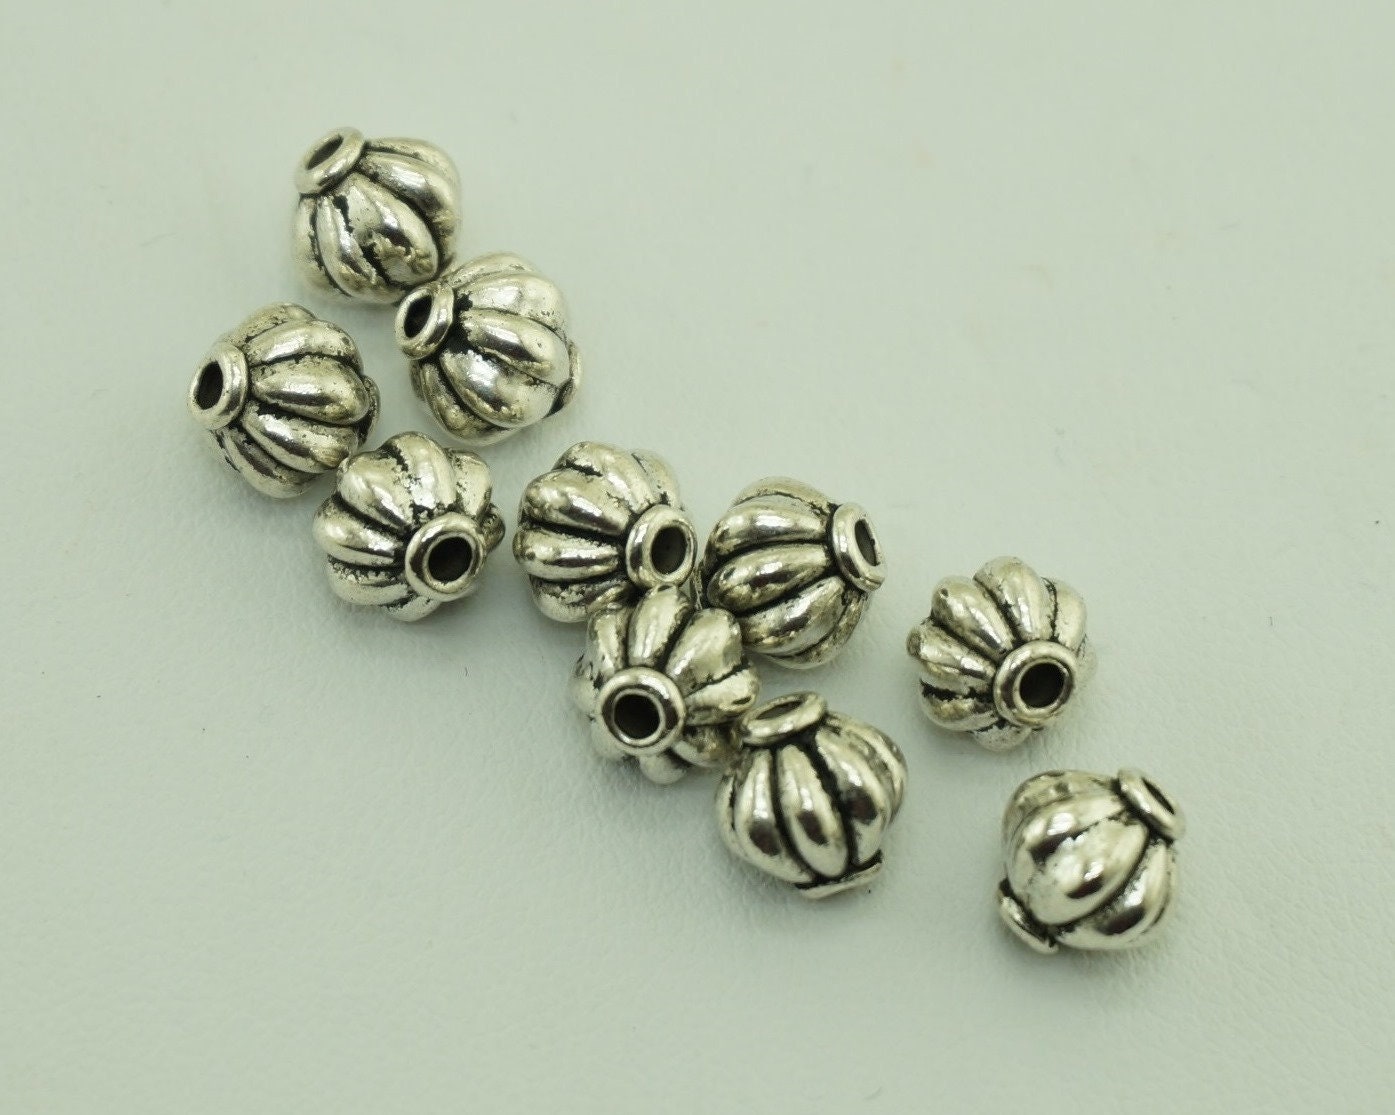 8mm 8pc Bali Silver Beads, Spacer Beads, Jewelry Making Antique